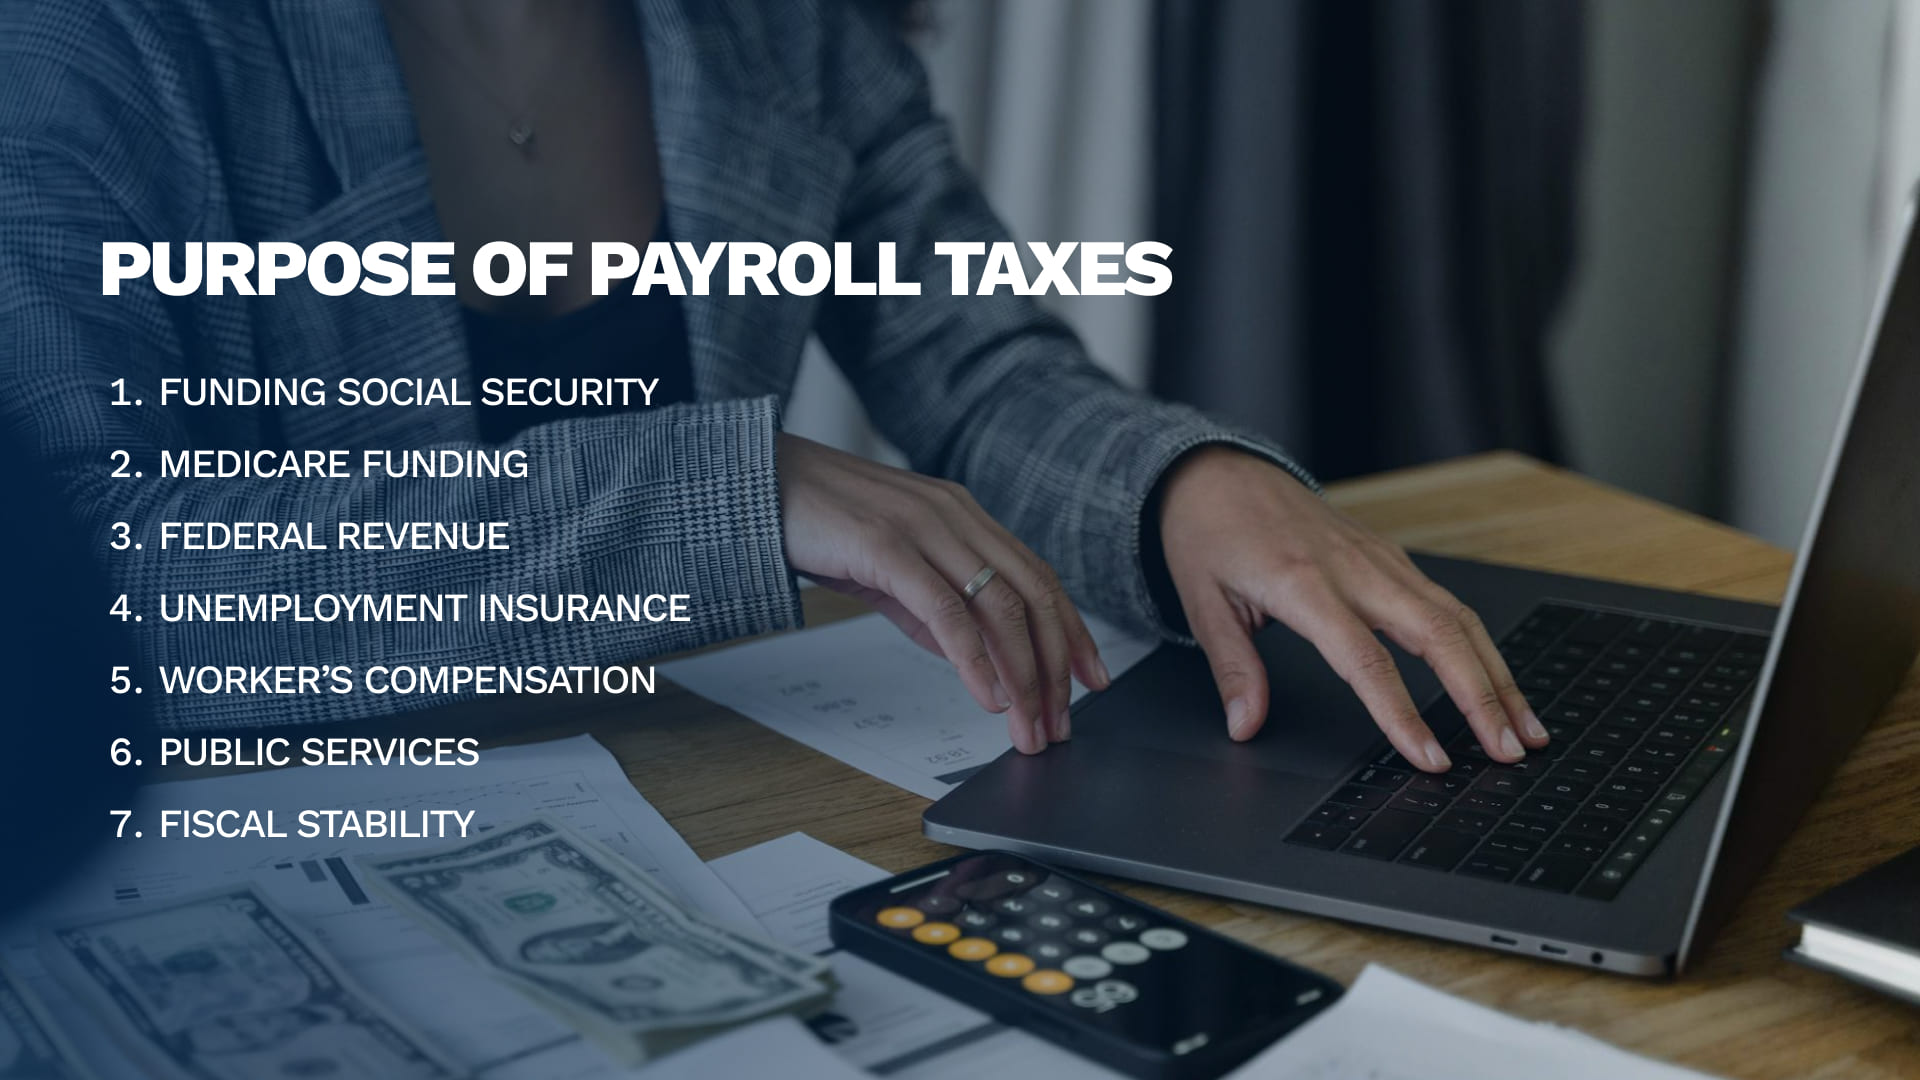 Types of Payroll Tax Deductions